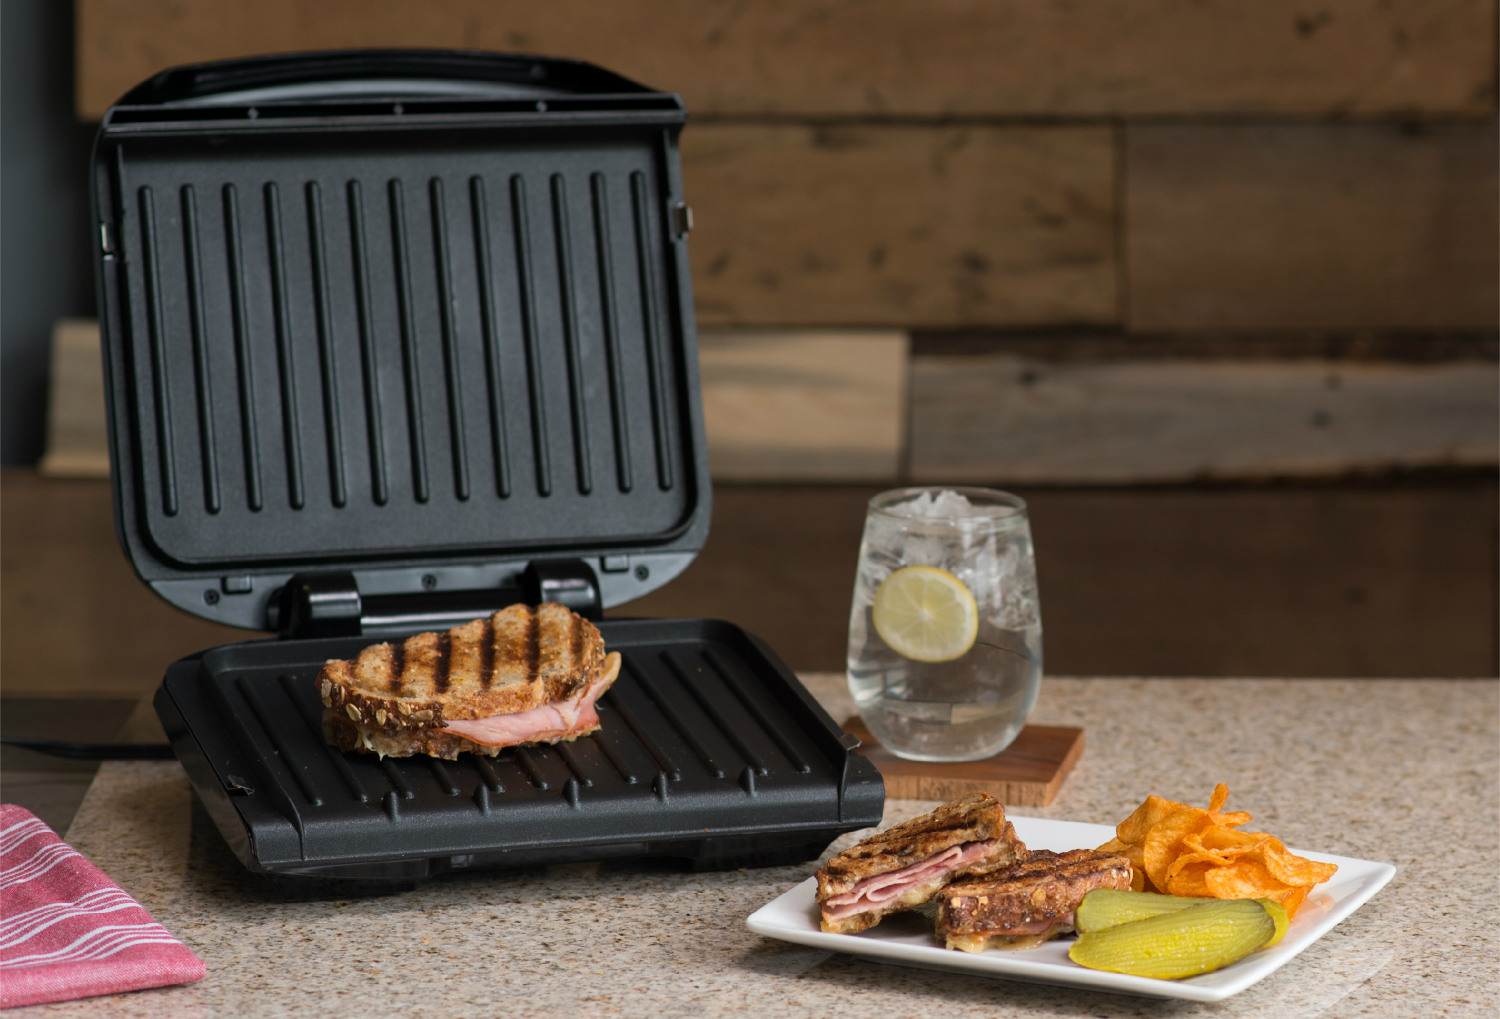 https://www.digitaltrends.com/wp-content/uploads/2019/05/george-foreman-4-serving-removable-plate-electric-grill-and-panini-press-2.jpg?p=1